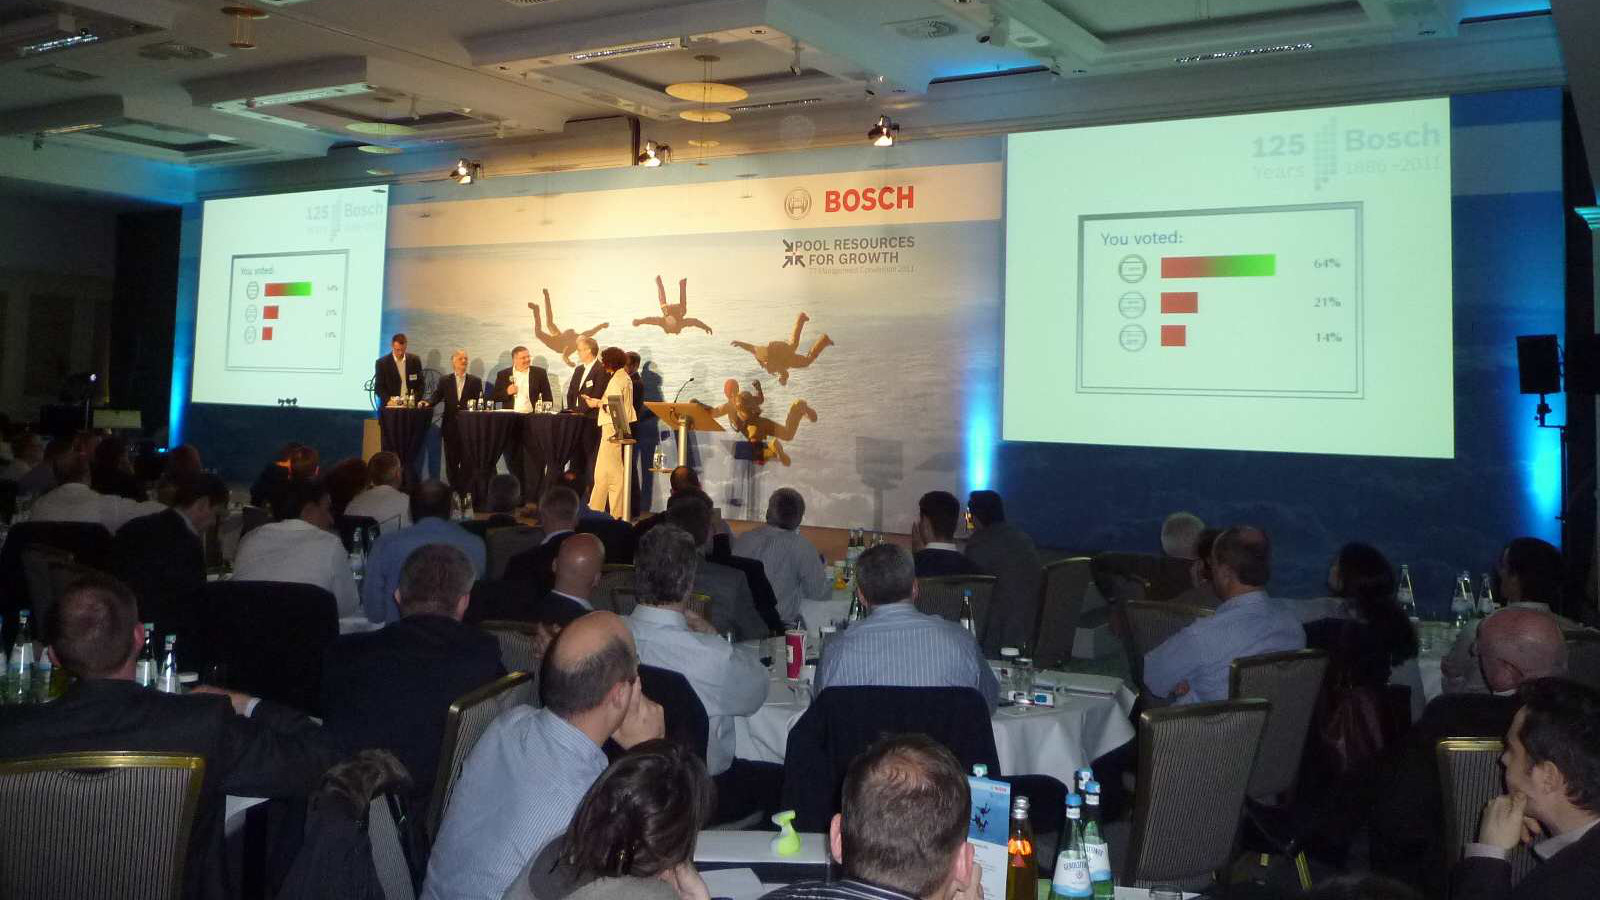 Interactive 3D multi-media presentation by Bosch powered by Shark 3D